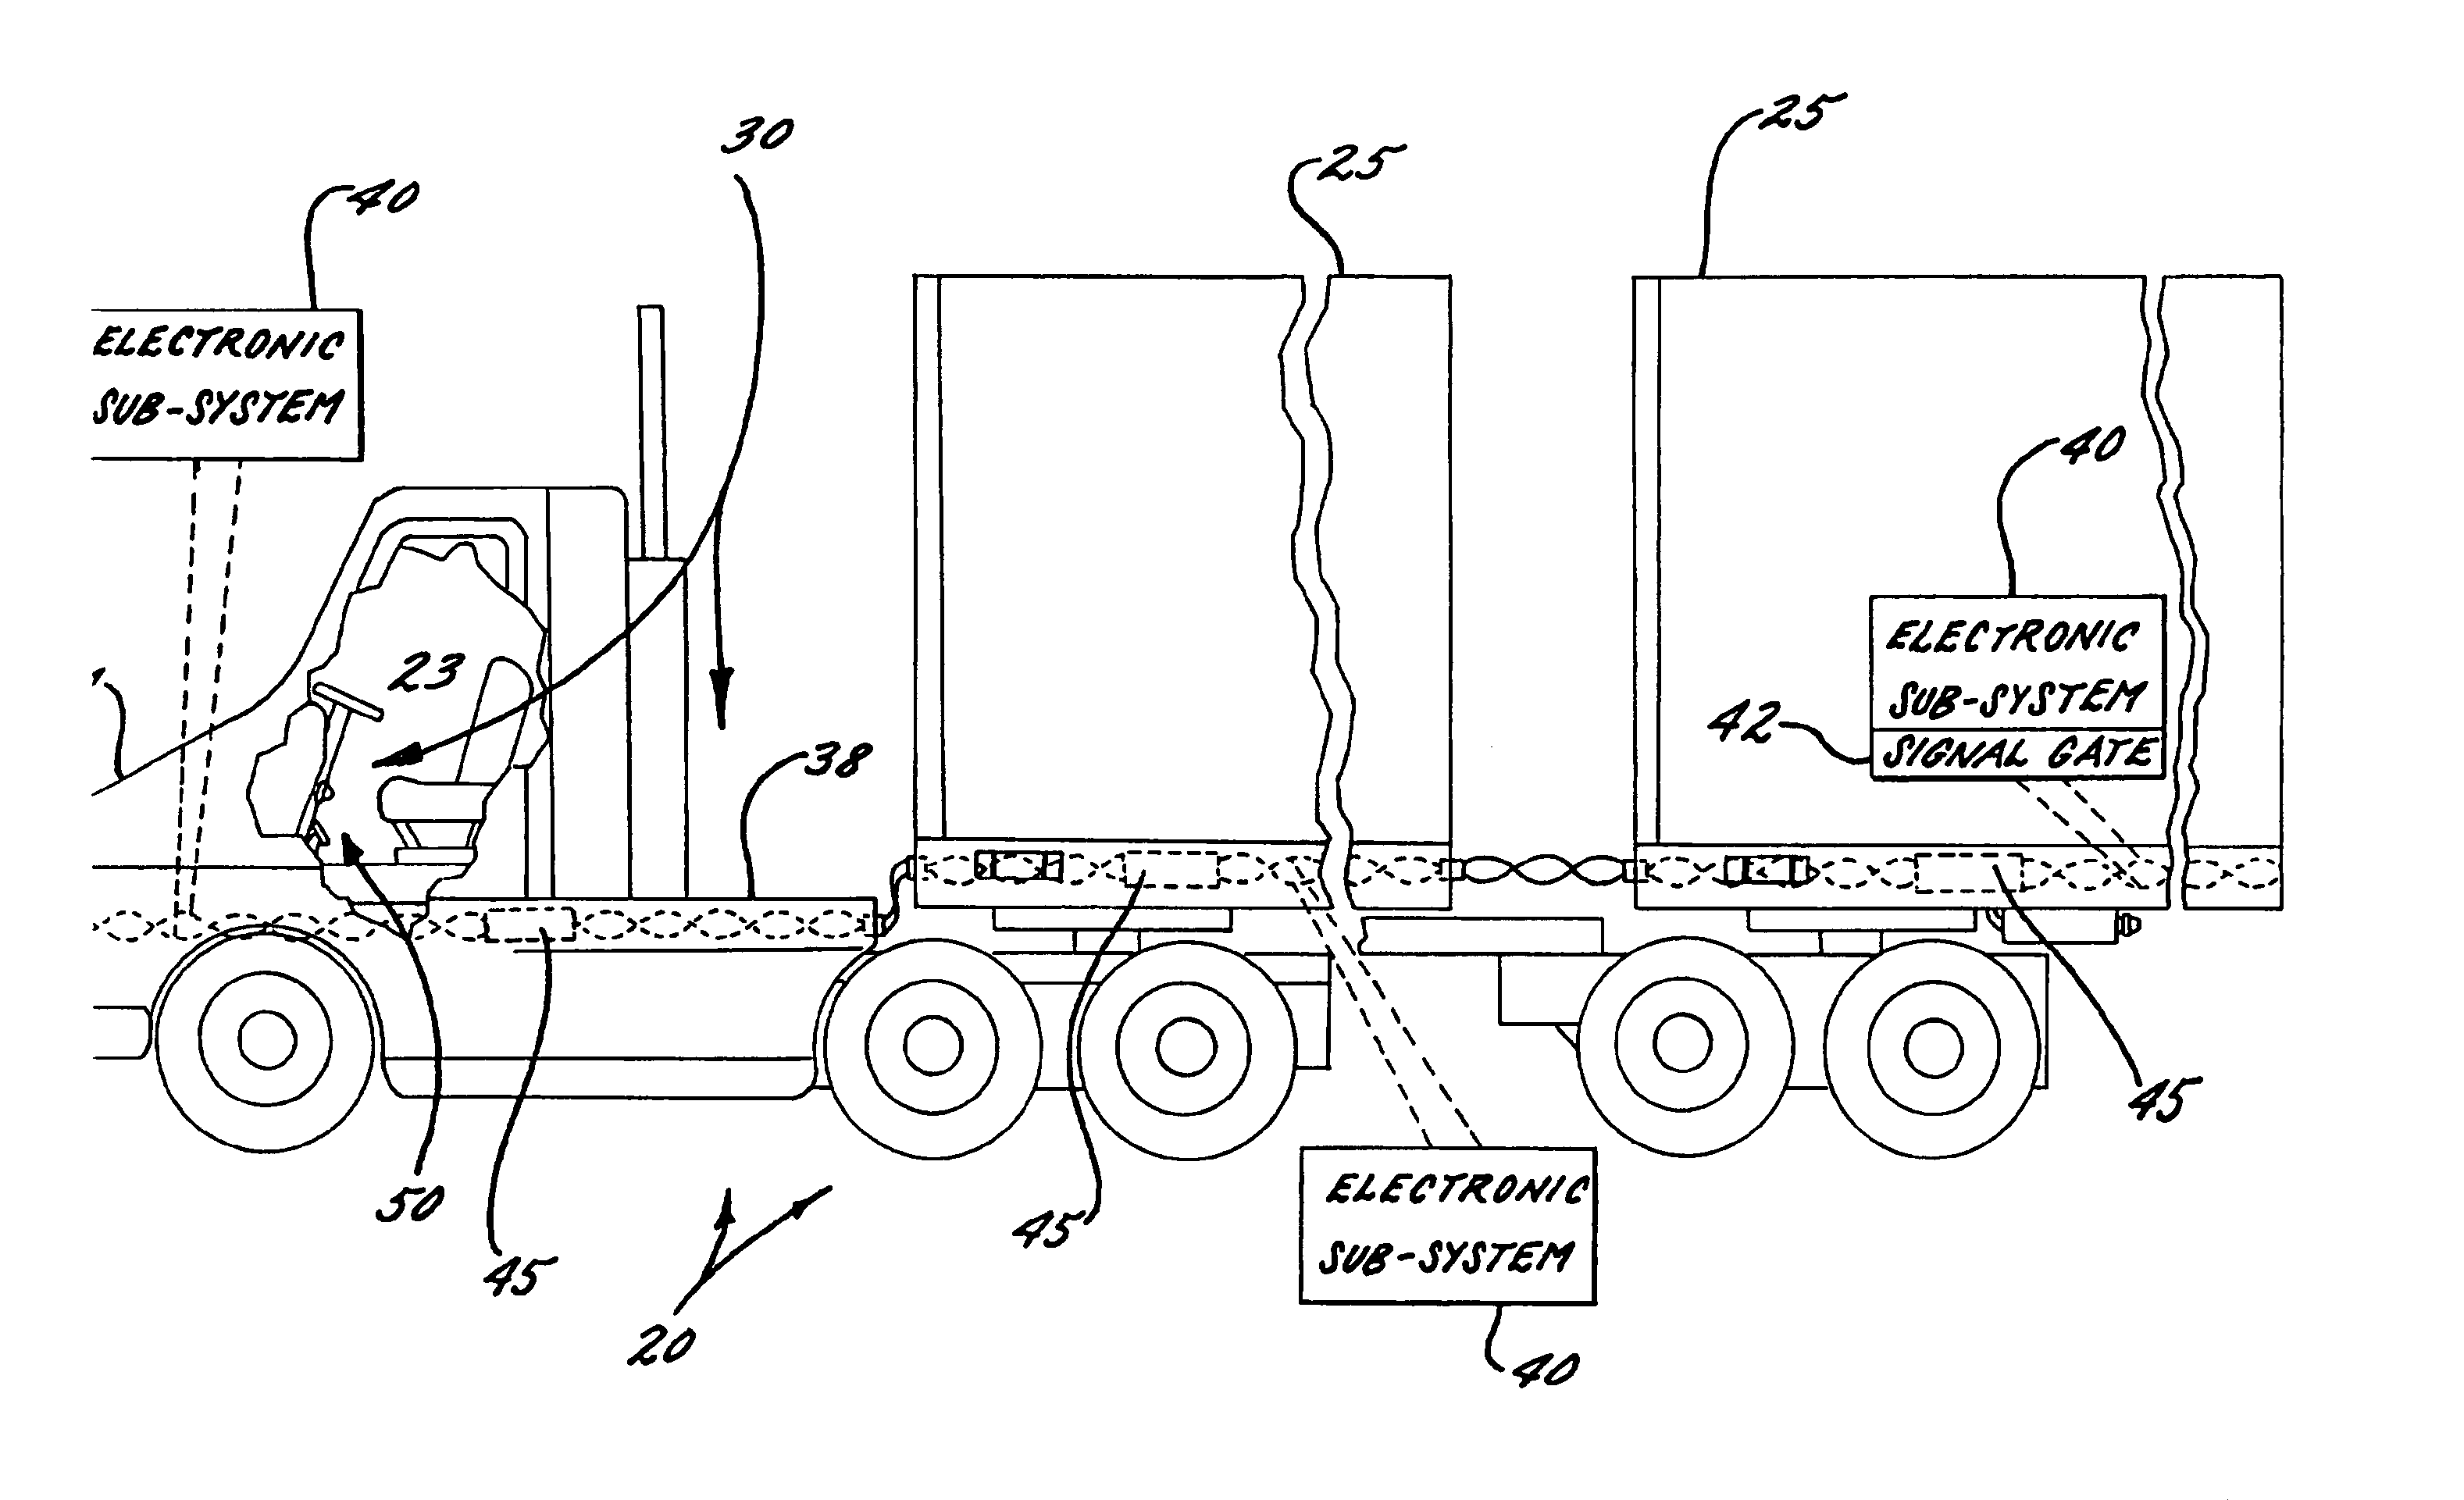 Method for data communication between a vehicle and a remote terminal